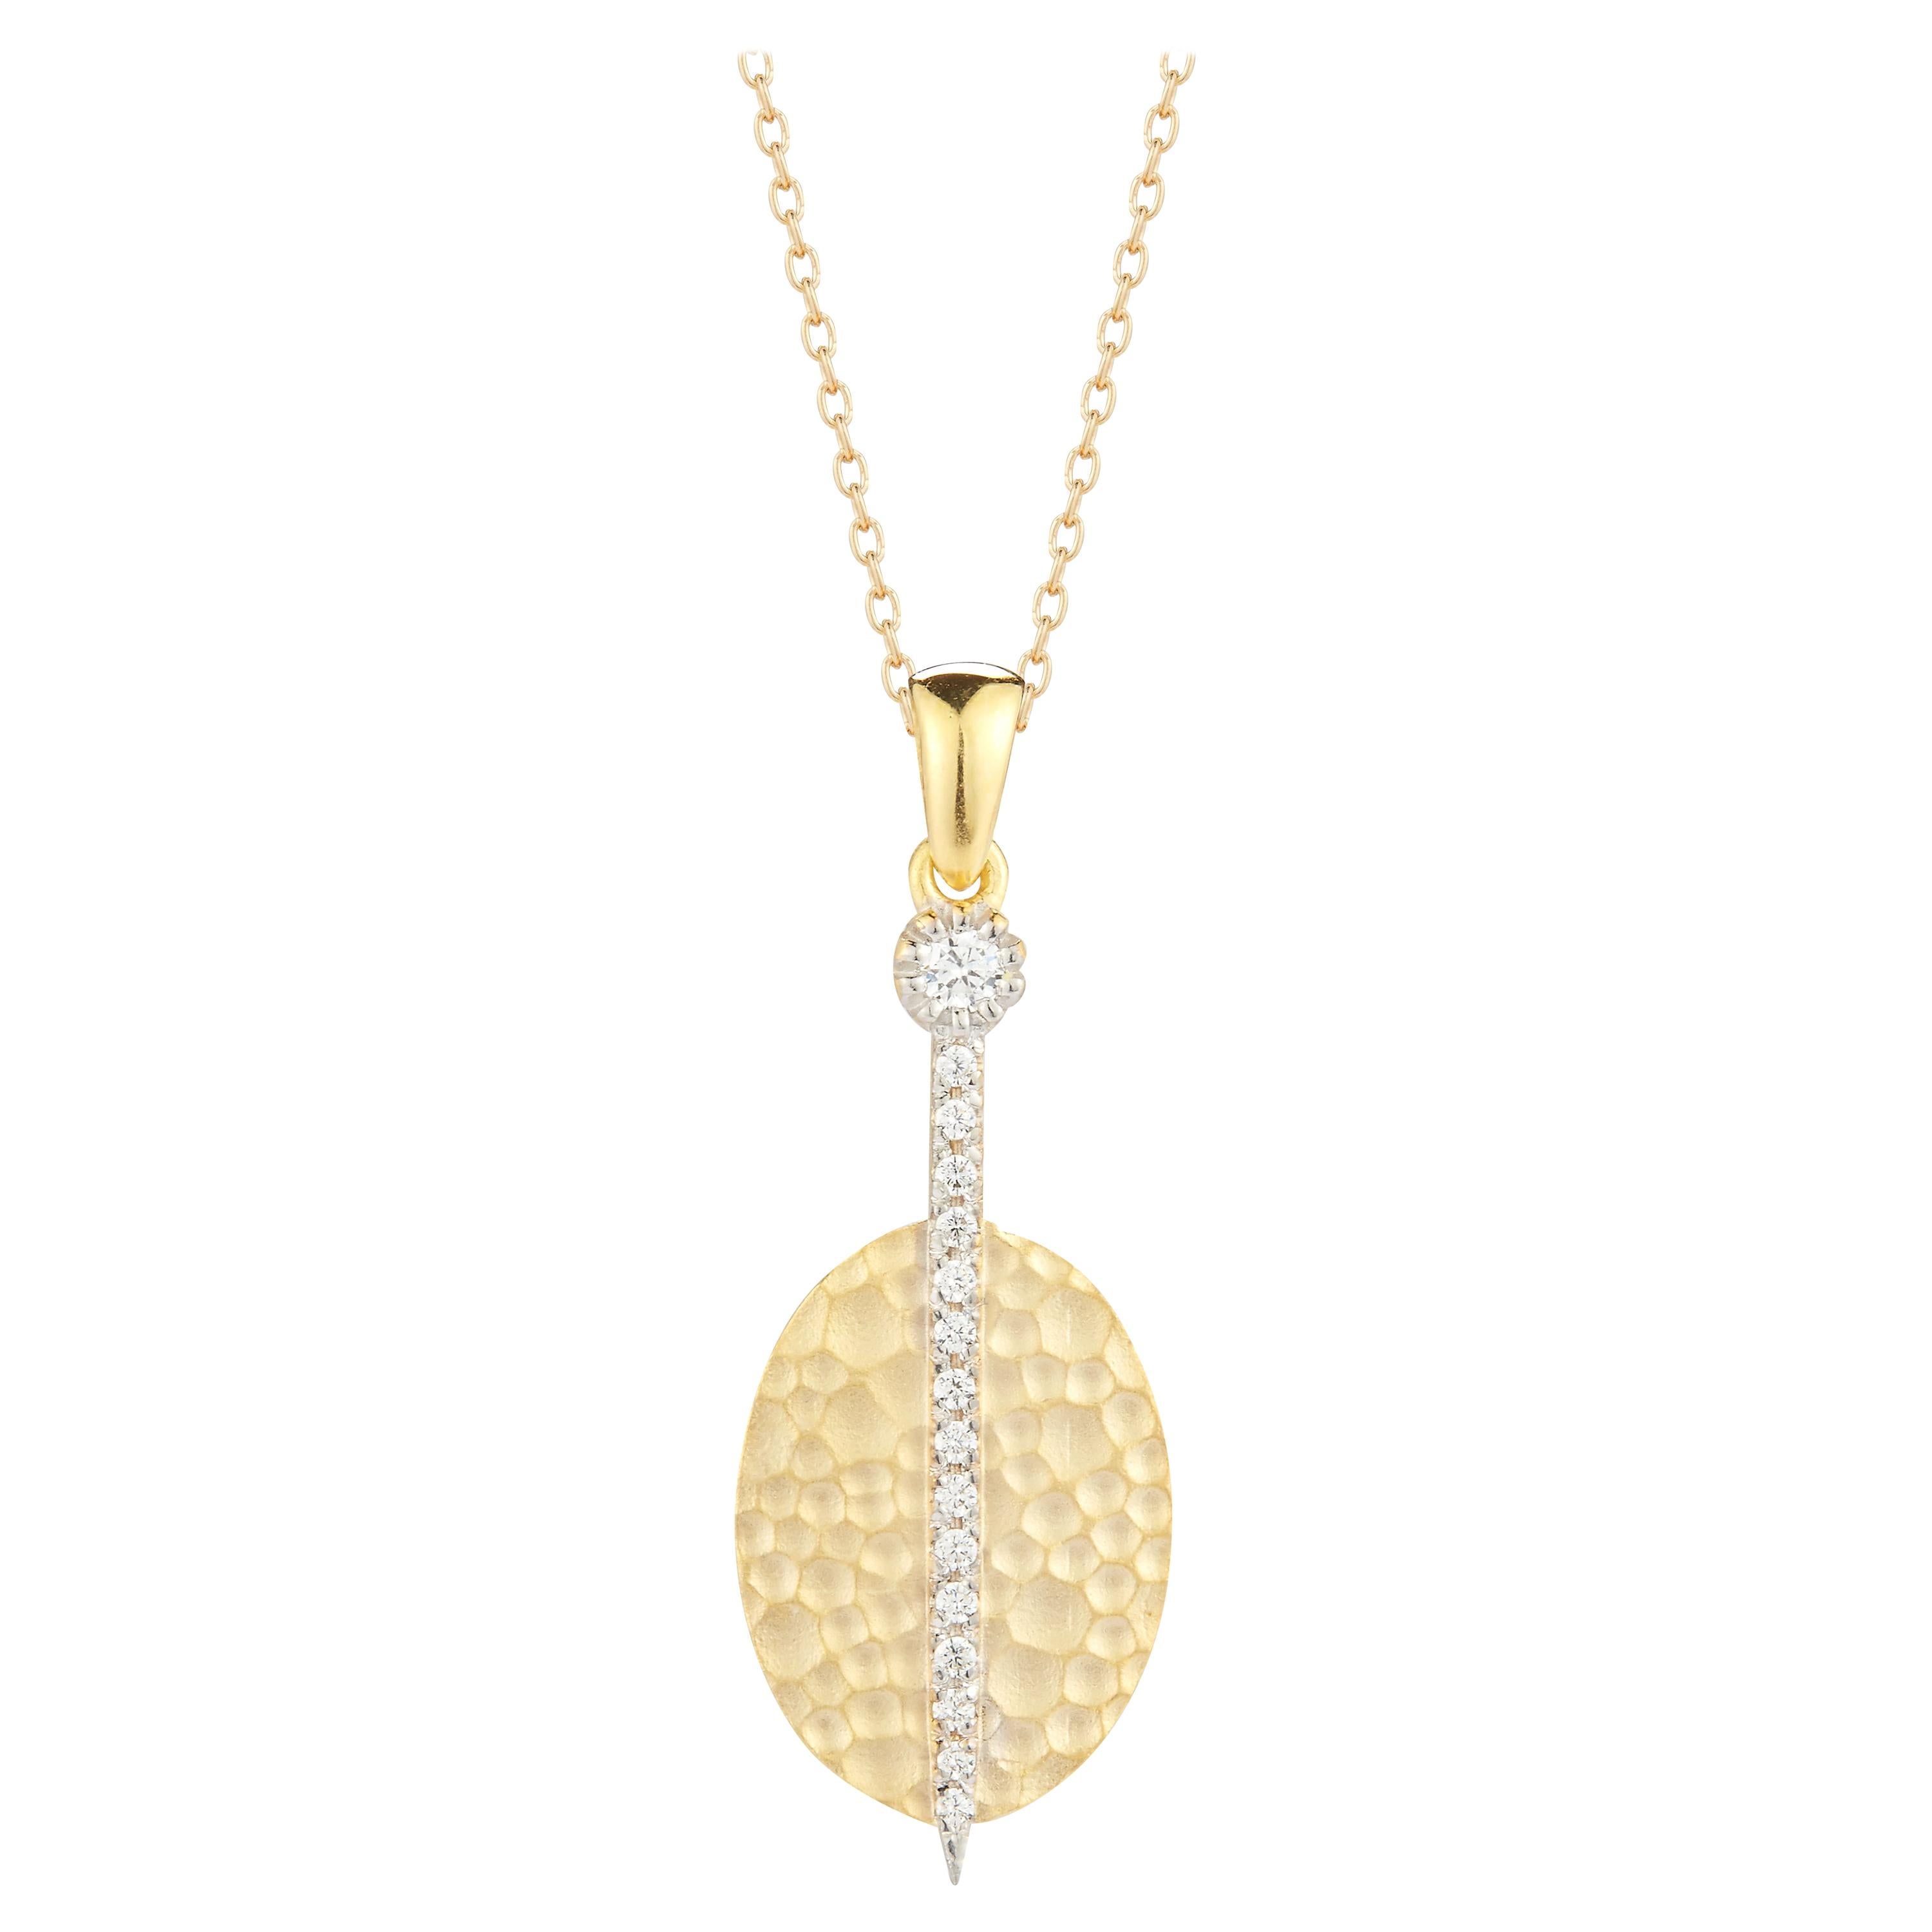 Hand-Crafted 14 Karat Yellow Gold Matte and Hammer-Finished Oval Pendant